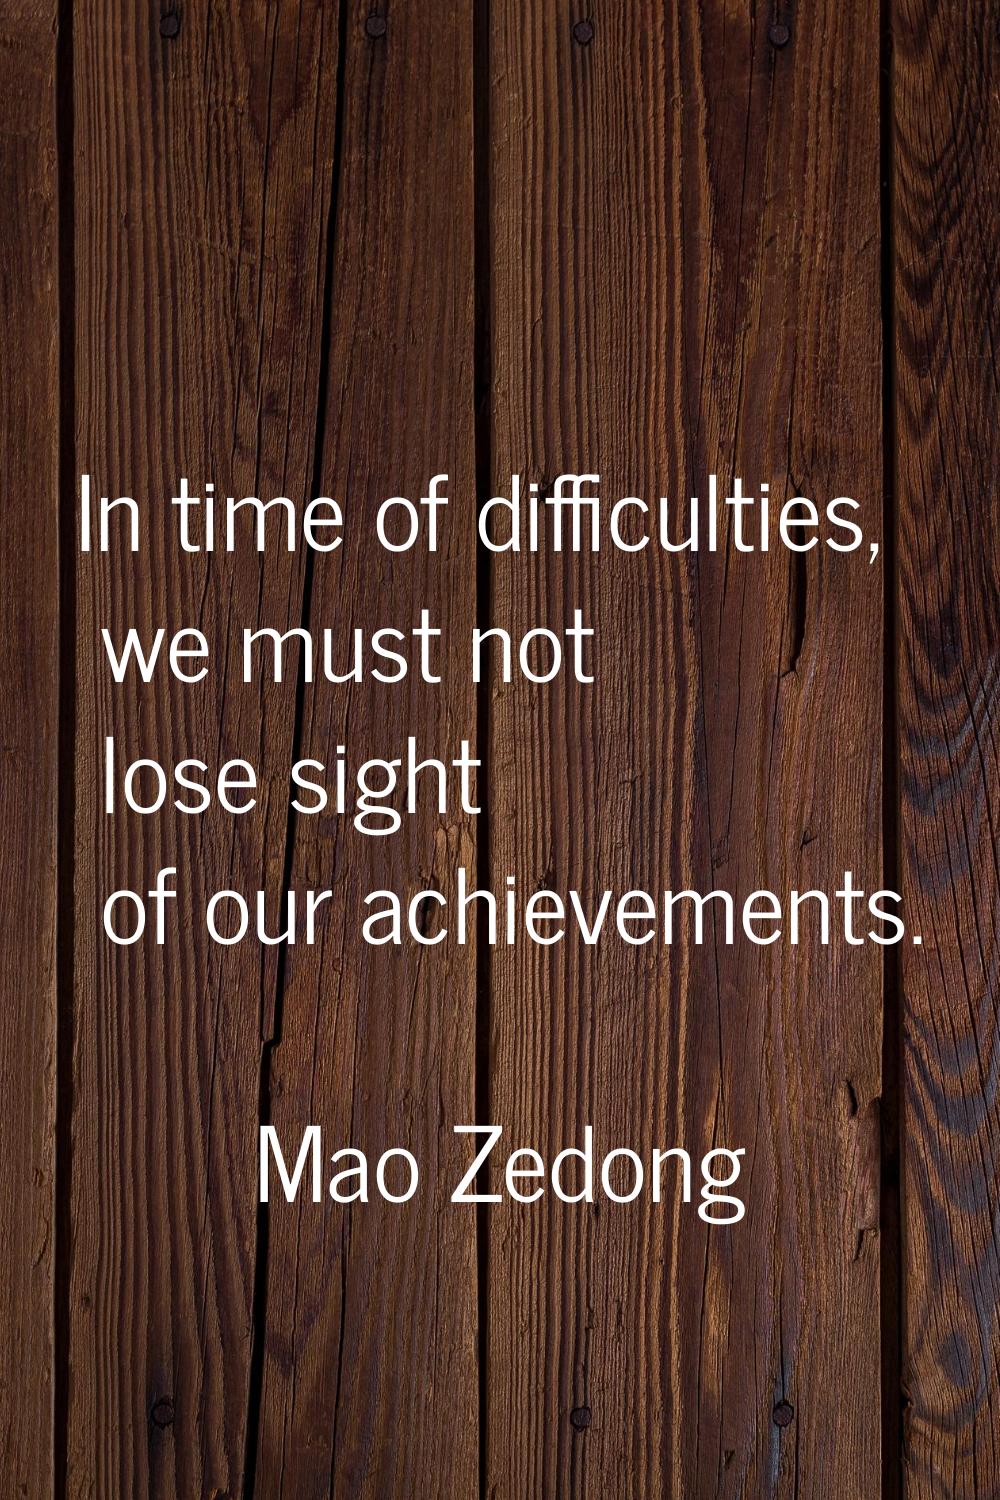 In time of difficulties, we must not lose sight of our achievements.